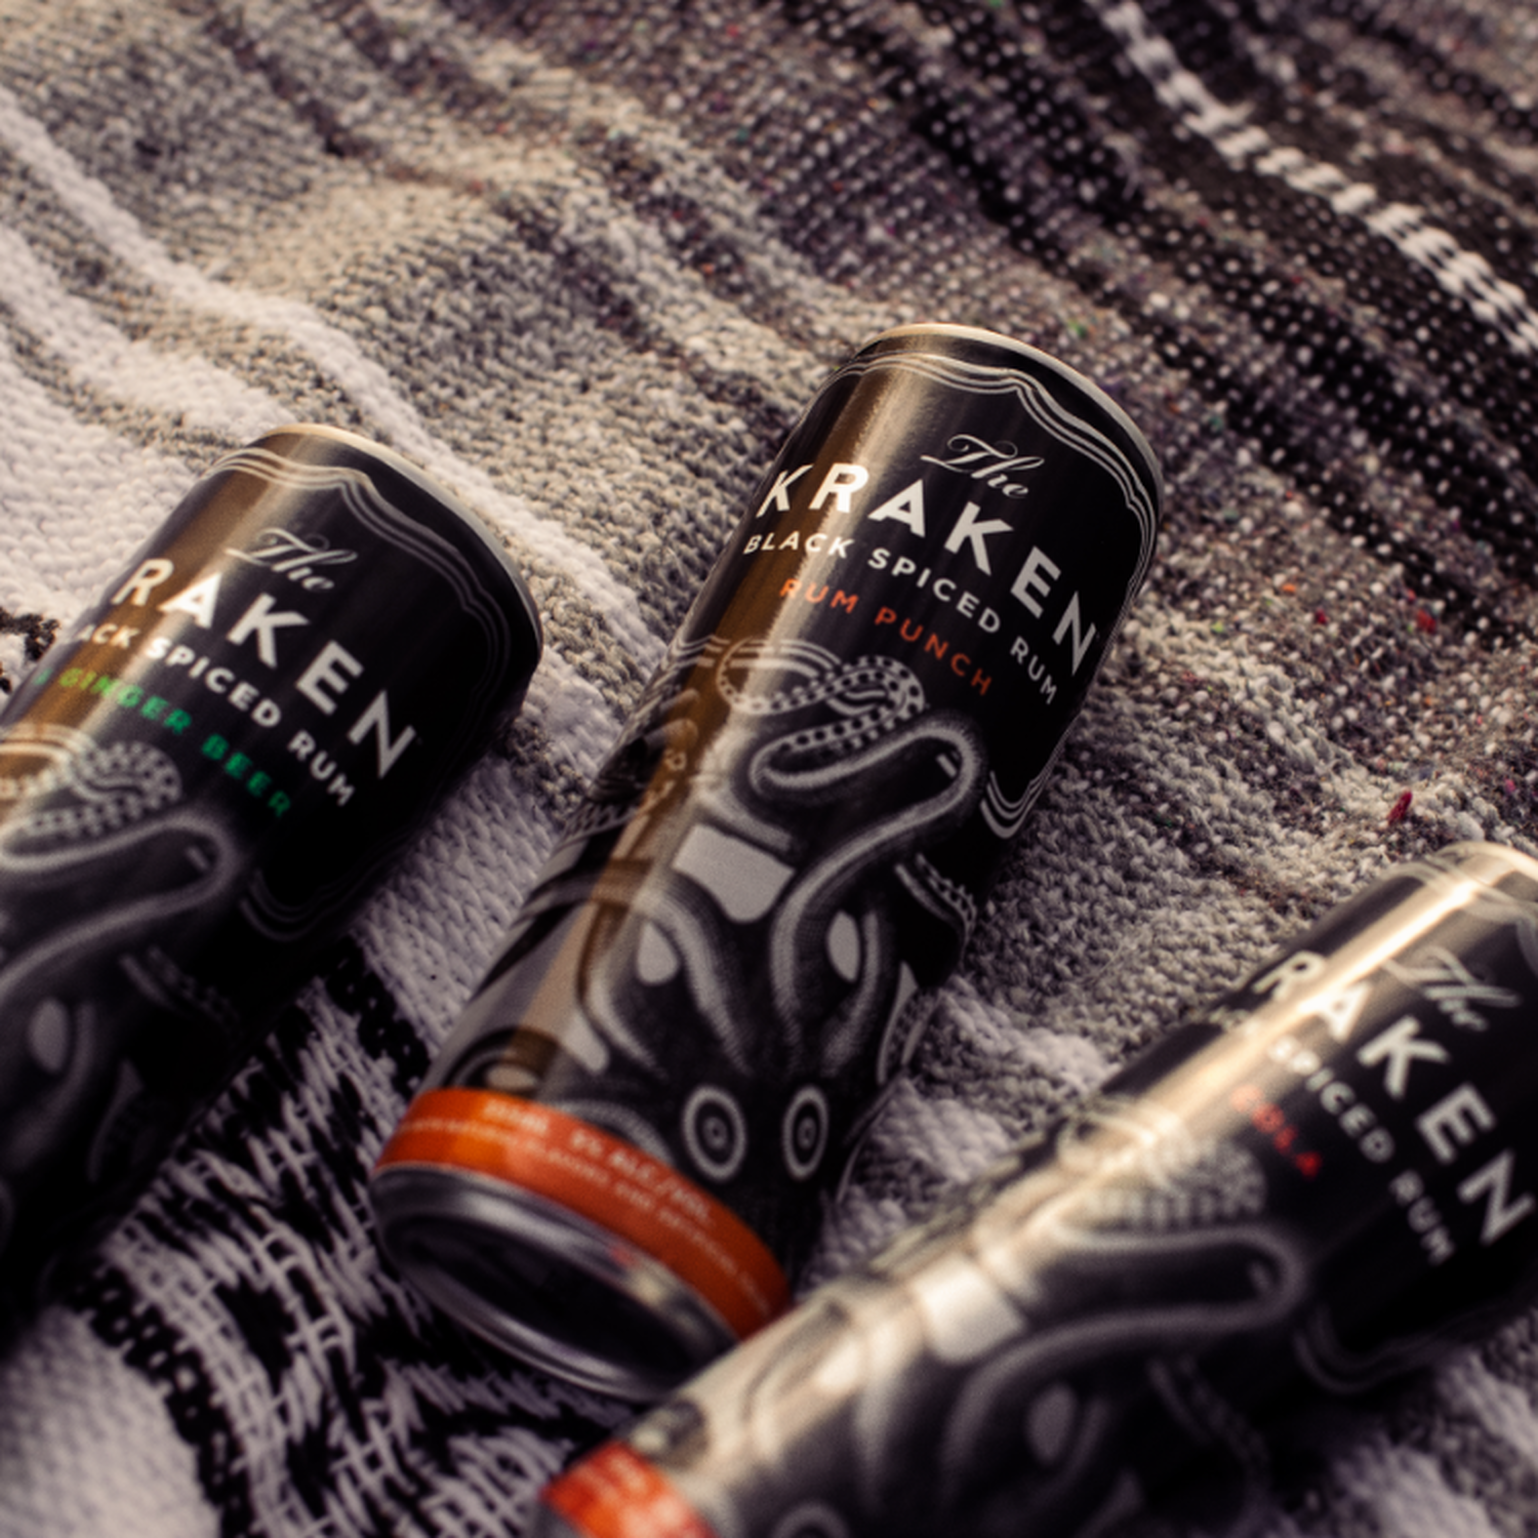 The Kraken Canned Cocktails on a beach blanket